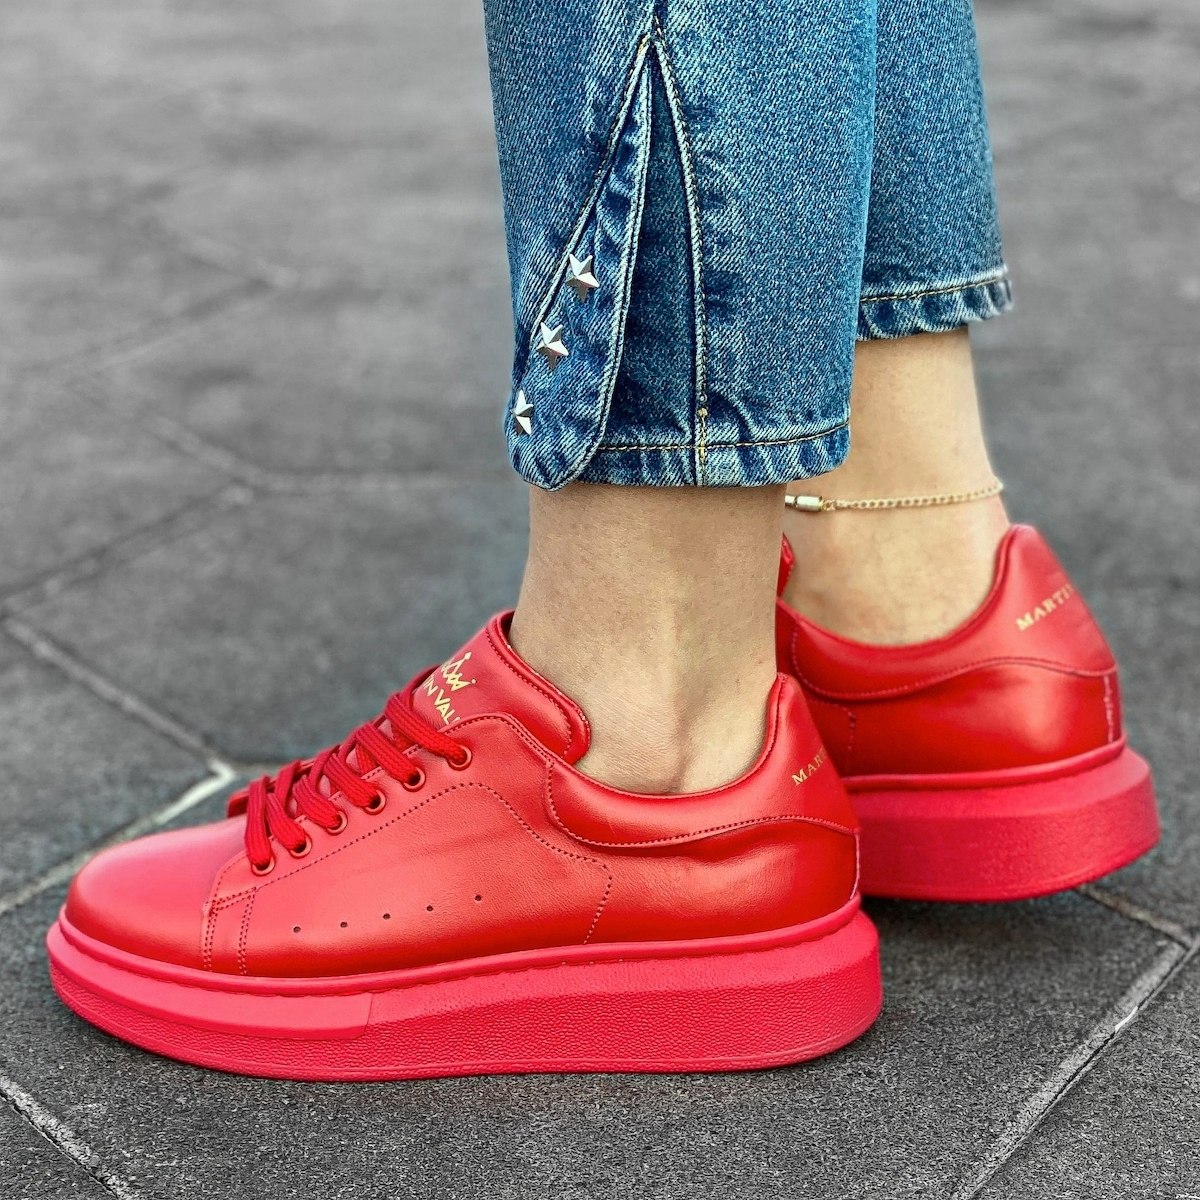 Woman's Hype Sole Sneakers In Full Red | Martin Valen